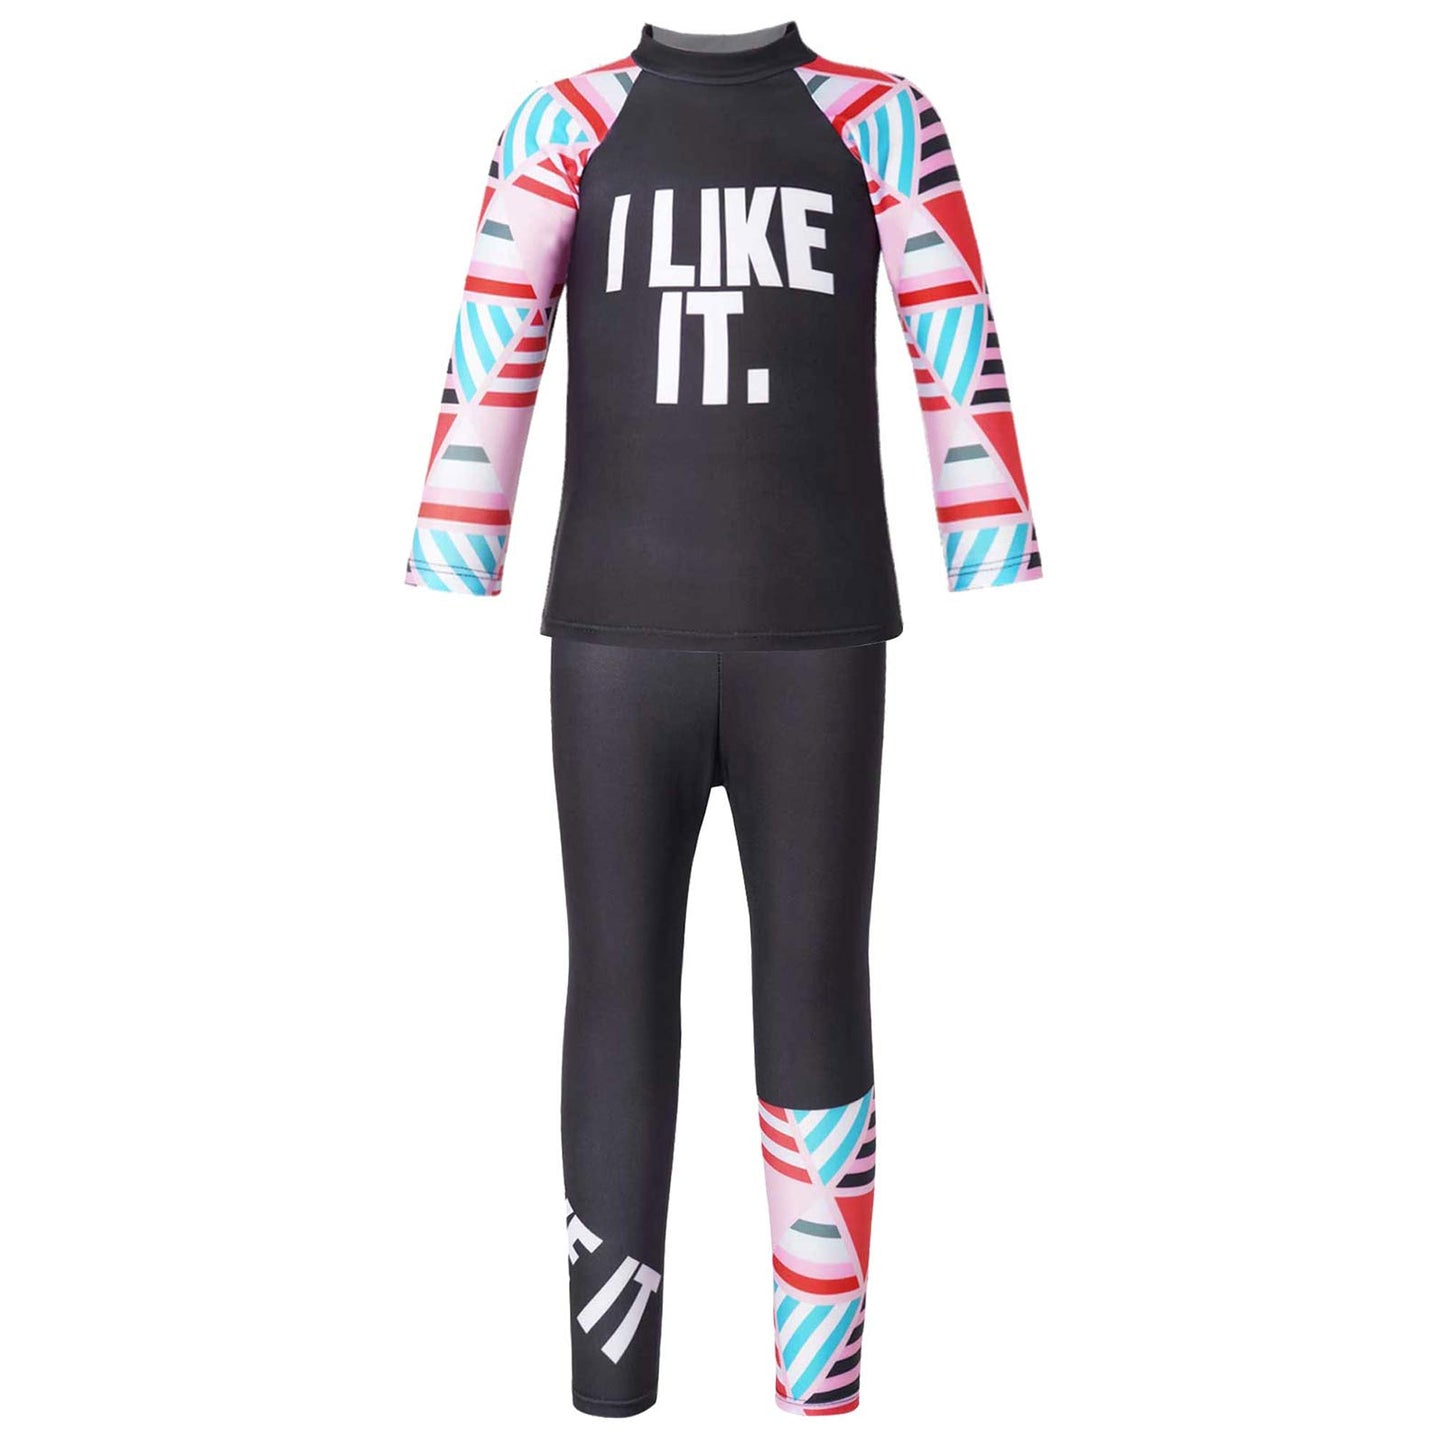 Kids Boys Swimsuit Mock Neck Long Sleeve Pattern Print Tops and Pants Swimming Suit